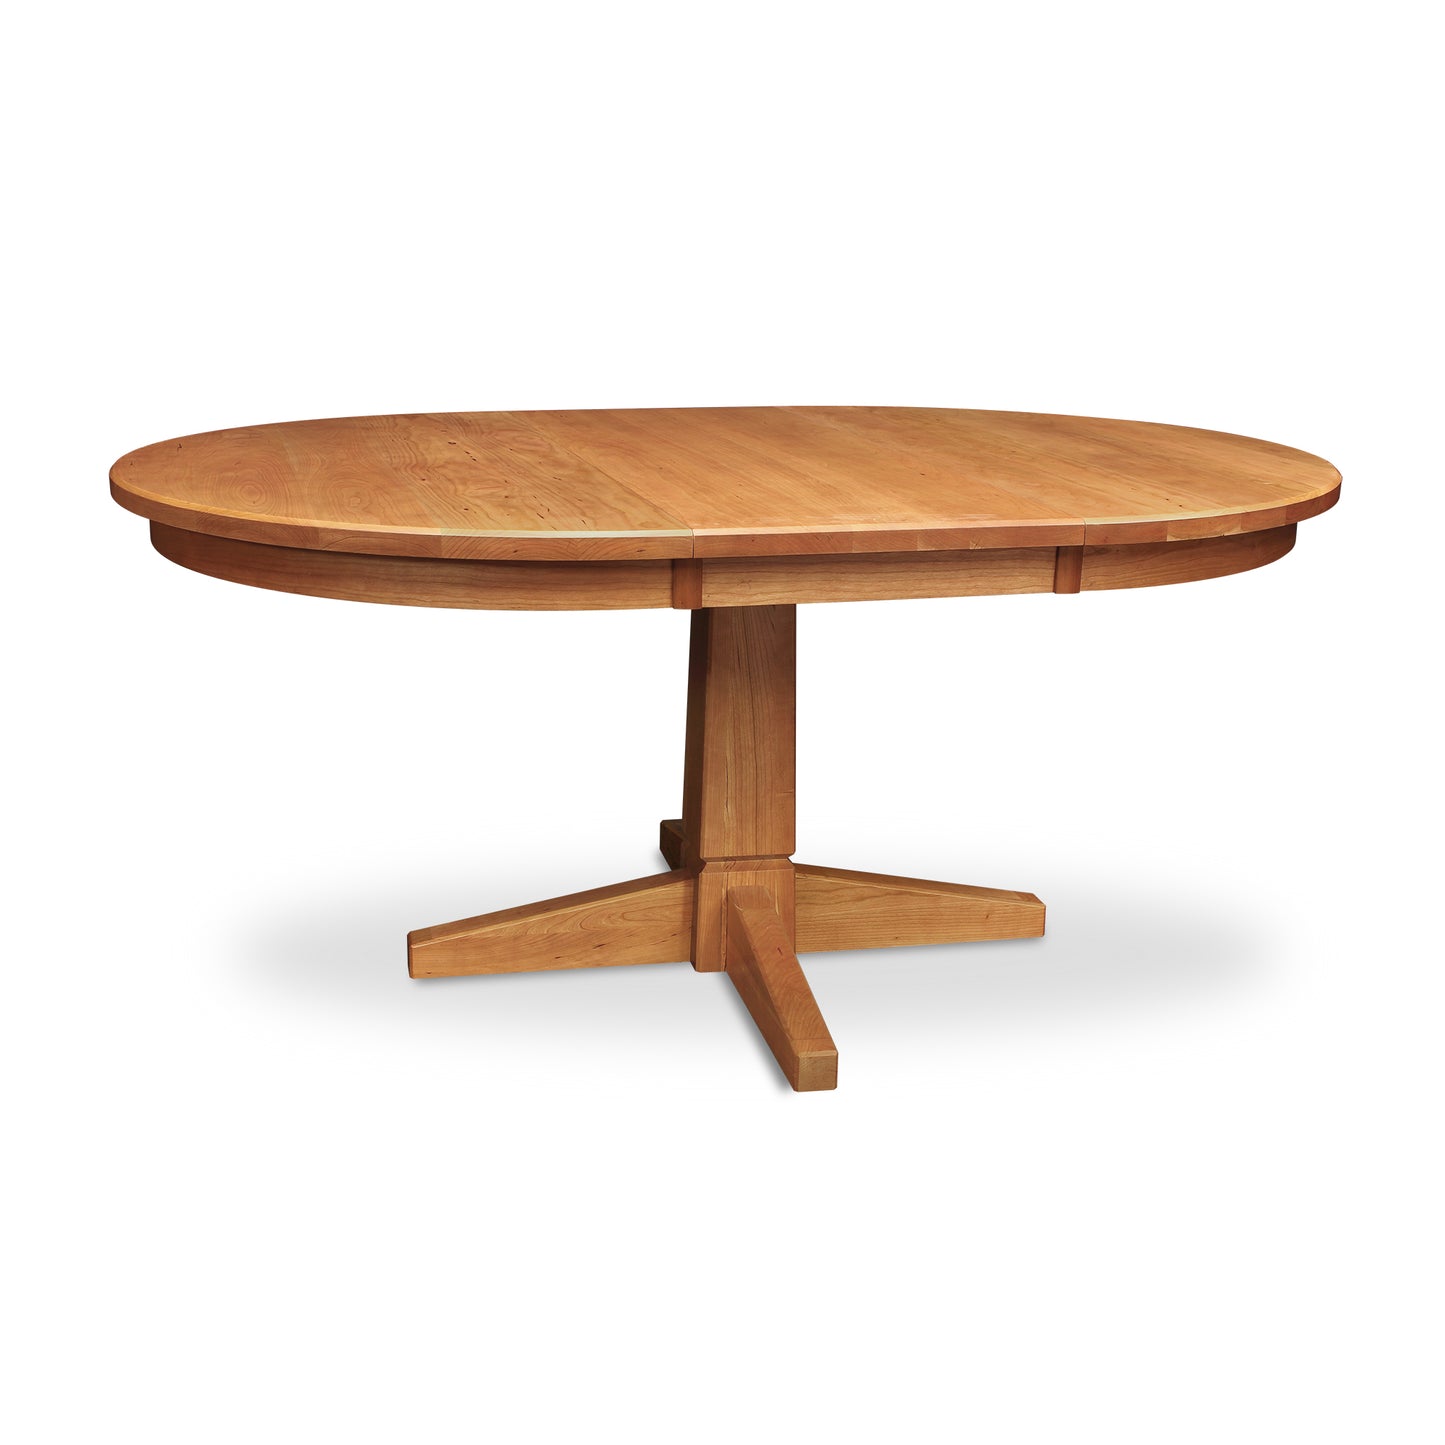 An oval dining table made of Lyndon Furniture's Natural Vermont Single Pedestal Round Extension Table.